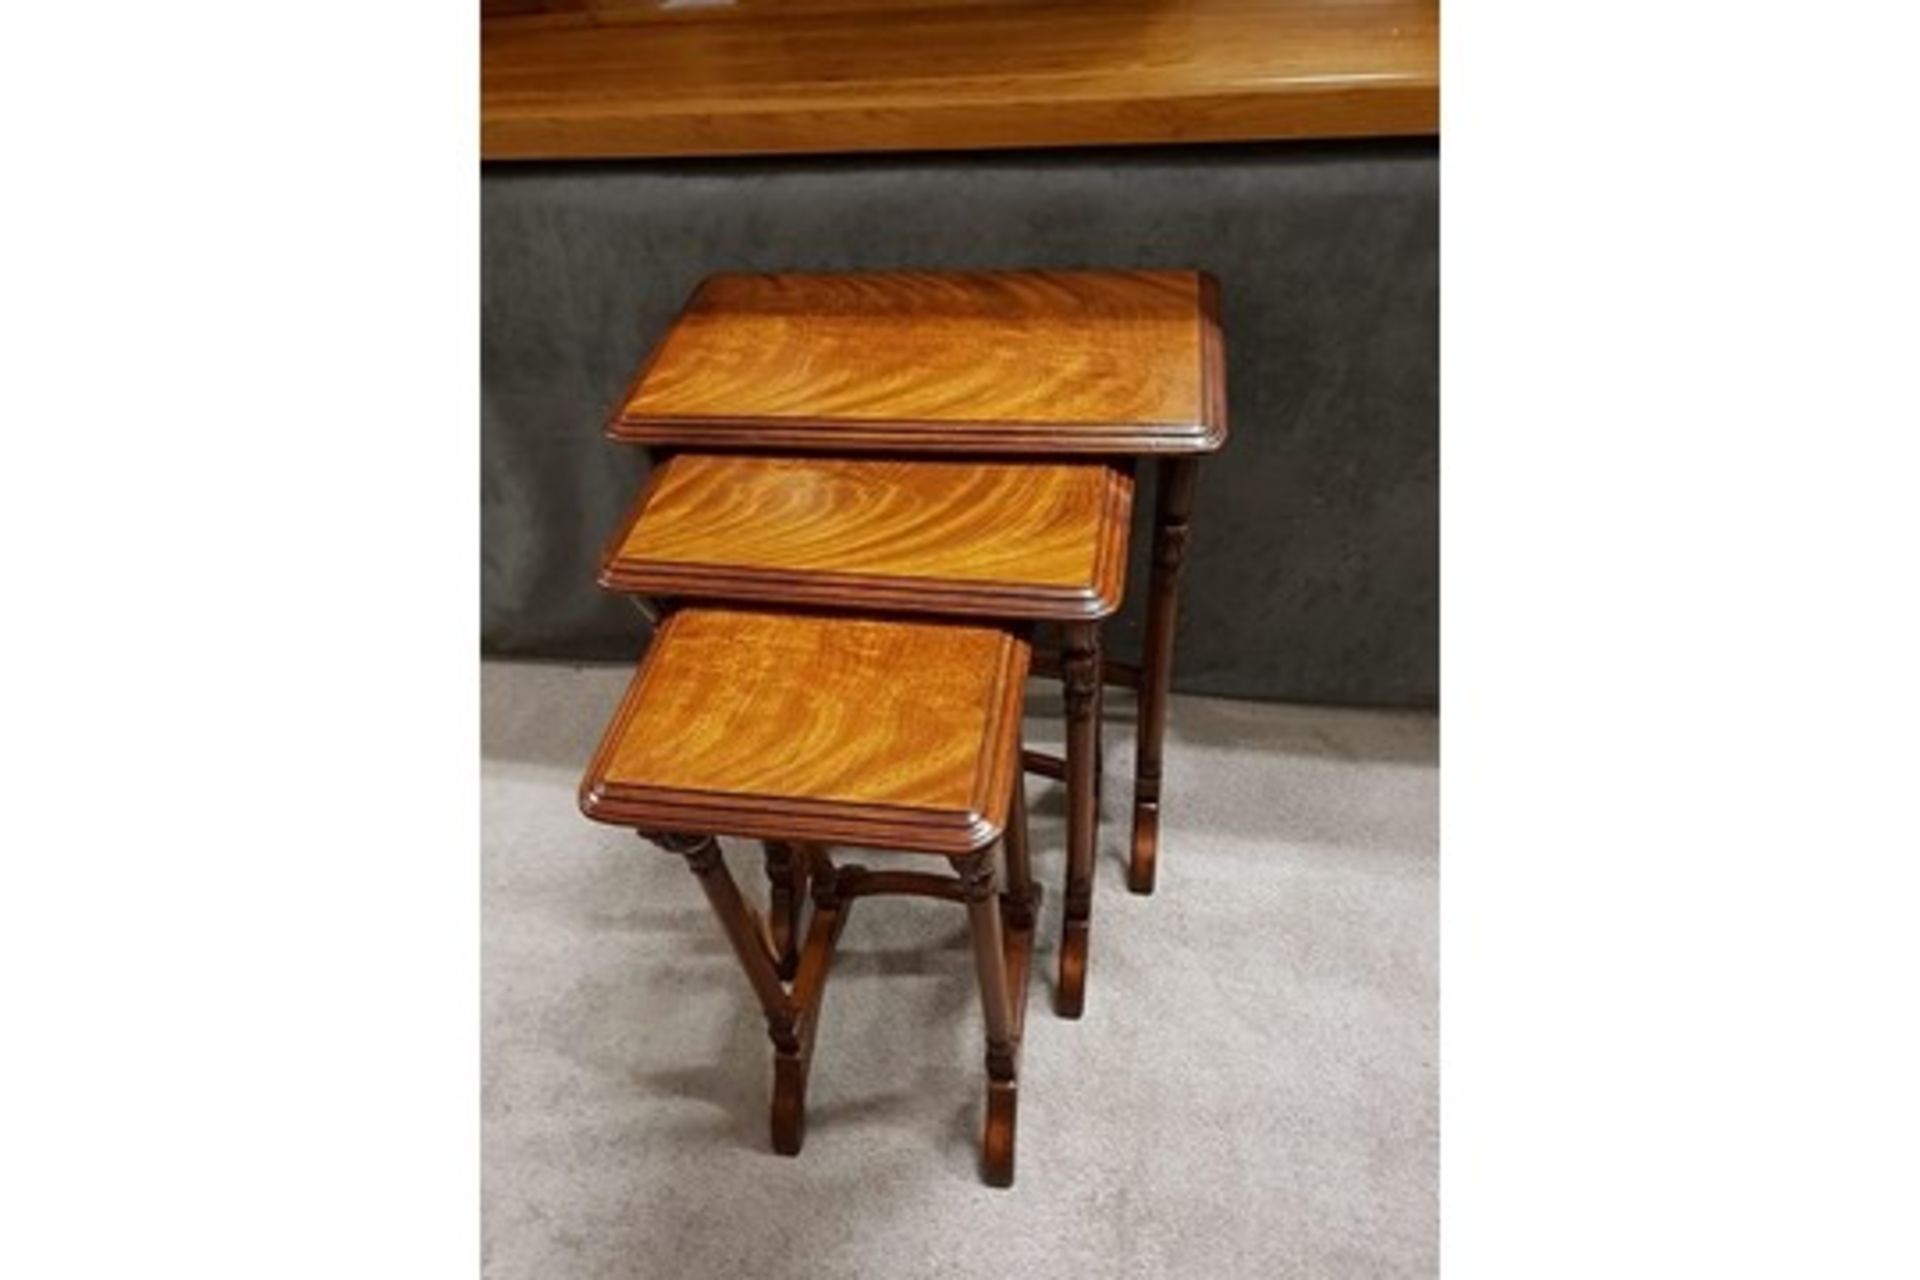 Tables - Century Furniture Manor Nesting Tables These Three Nesting Tables Feature Rectangular